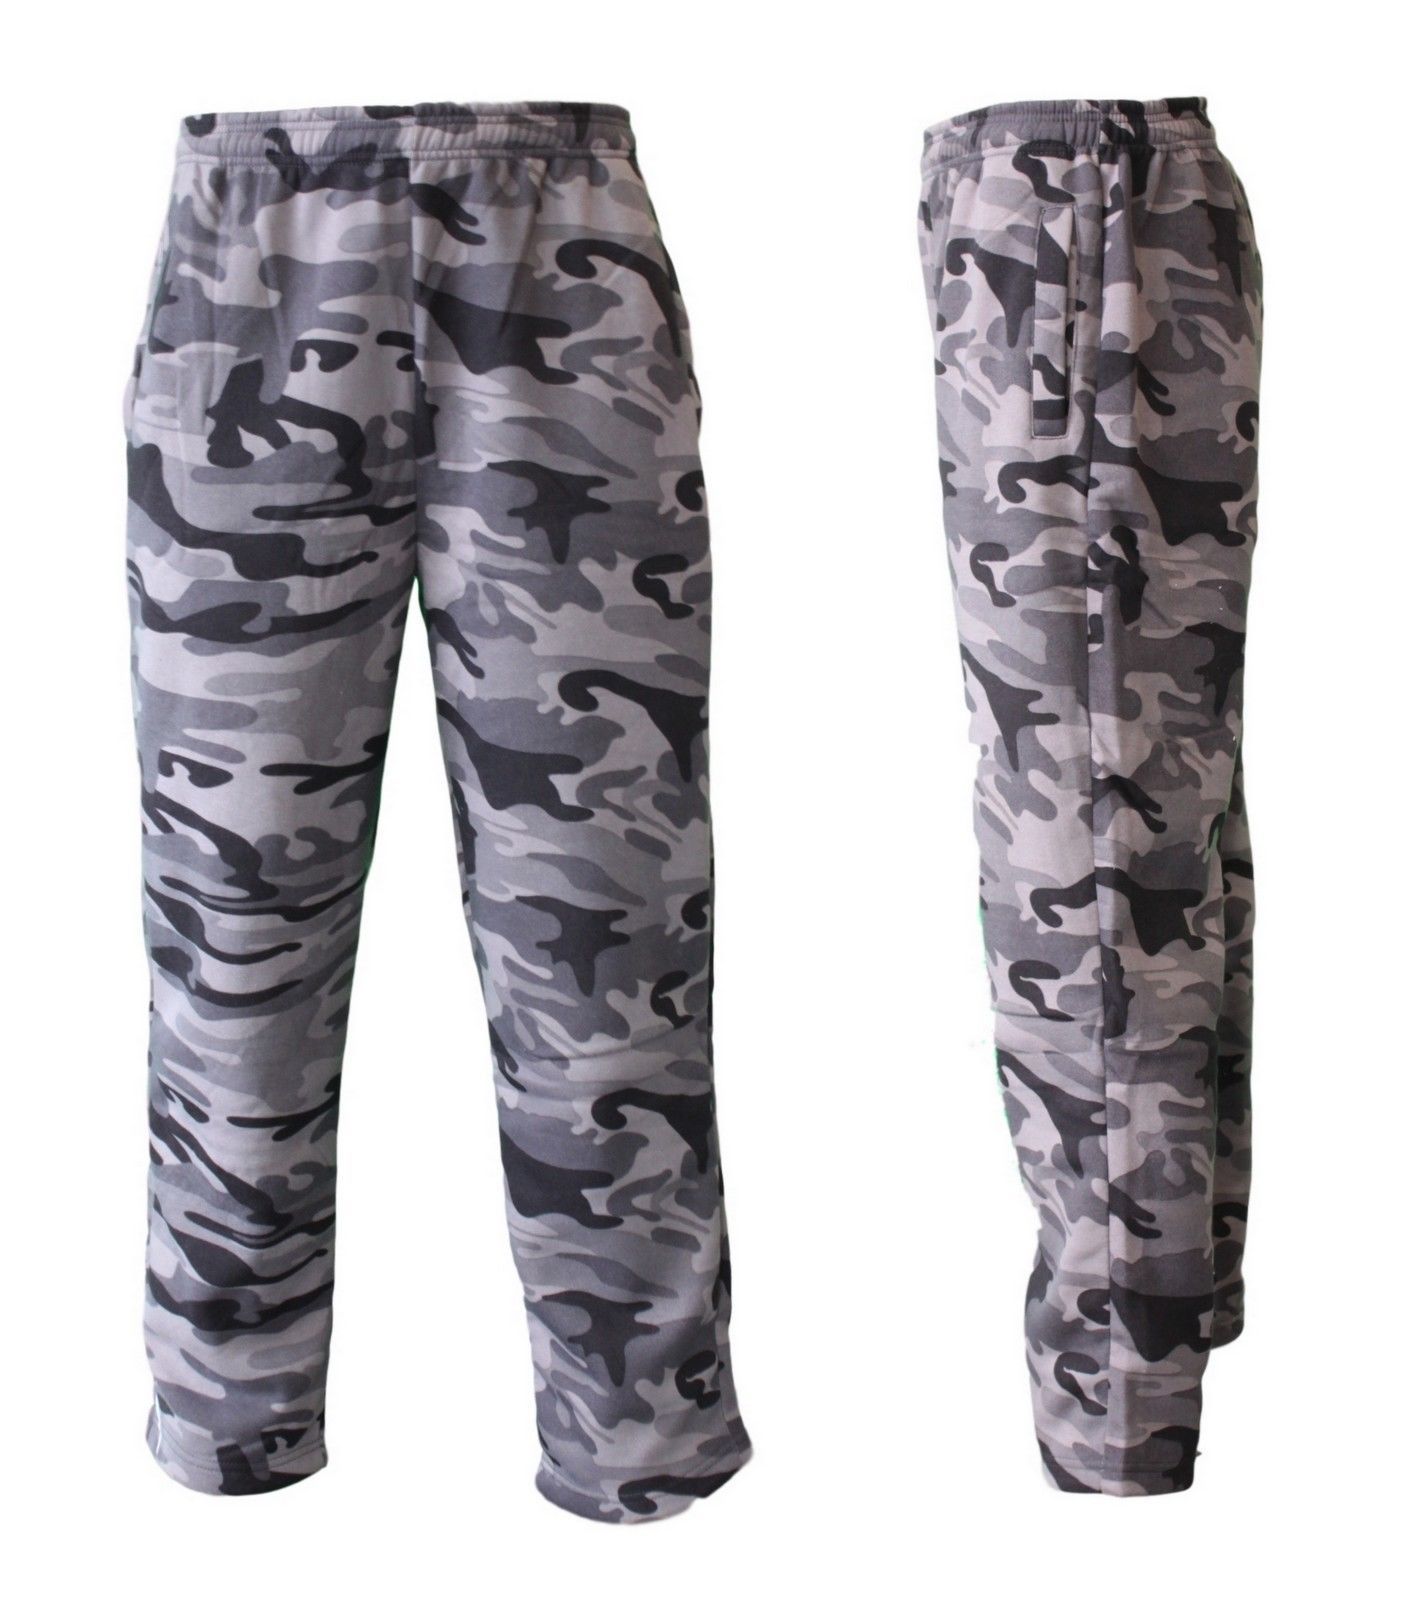 NEW Men's Fleece Lined Track Pants Camouflage Military Print Casual ...